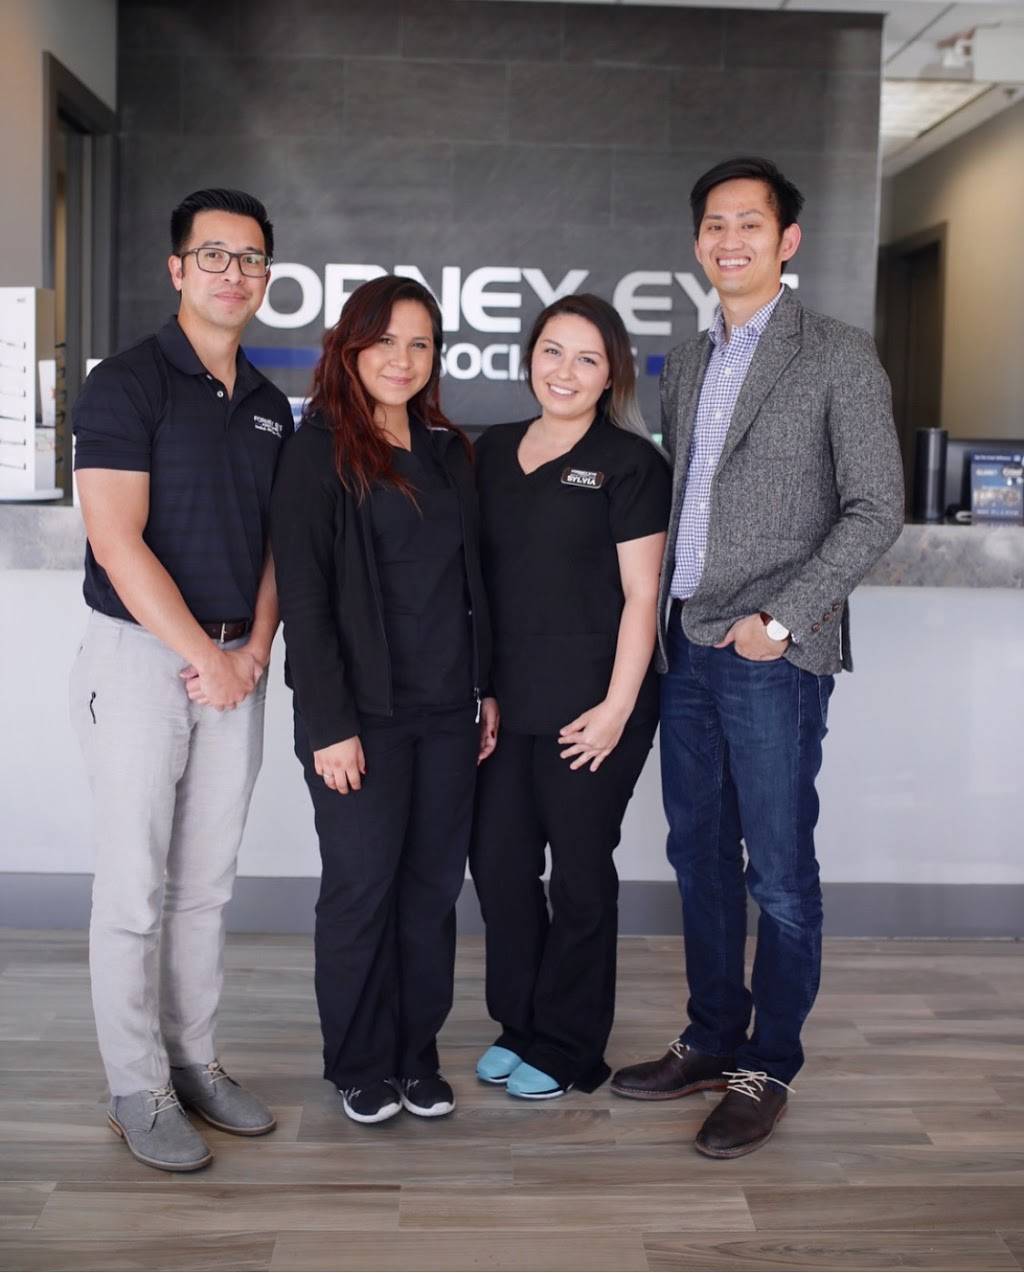 Joey D. Tran, O.D | 780 E US Hwy 80, Forney, TX 75126 | Phone: (972) 552-9681